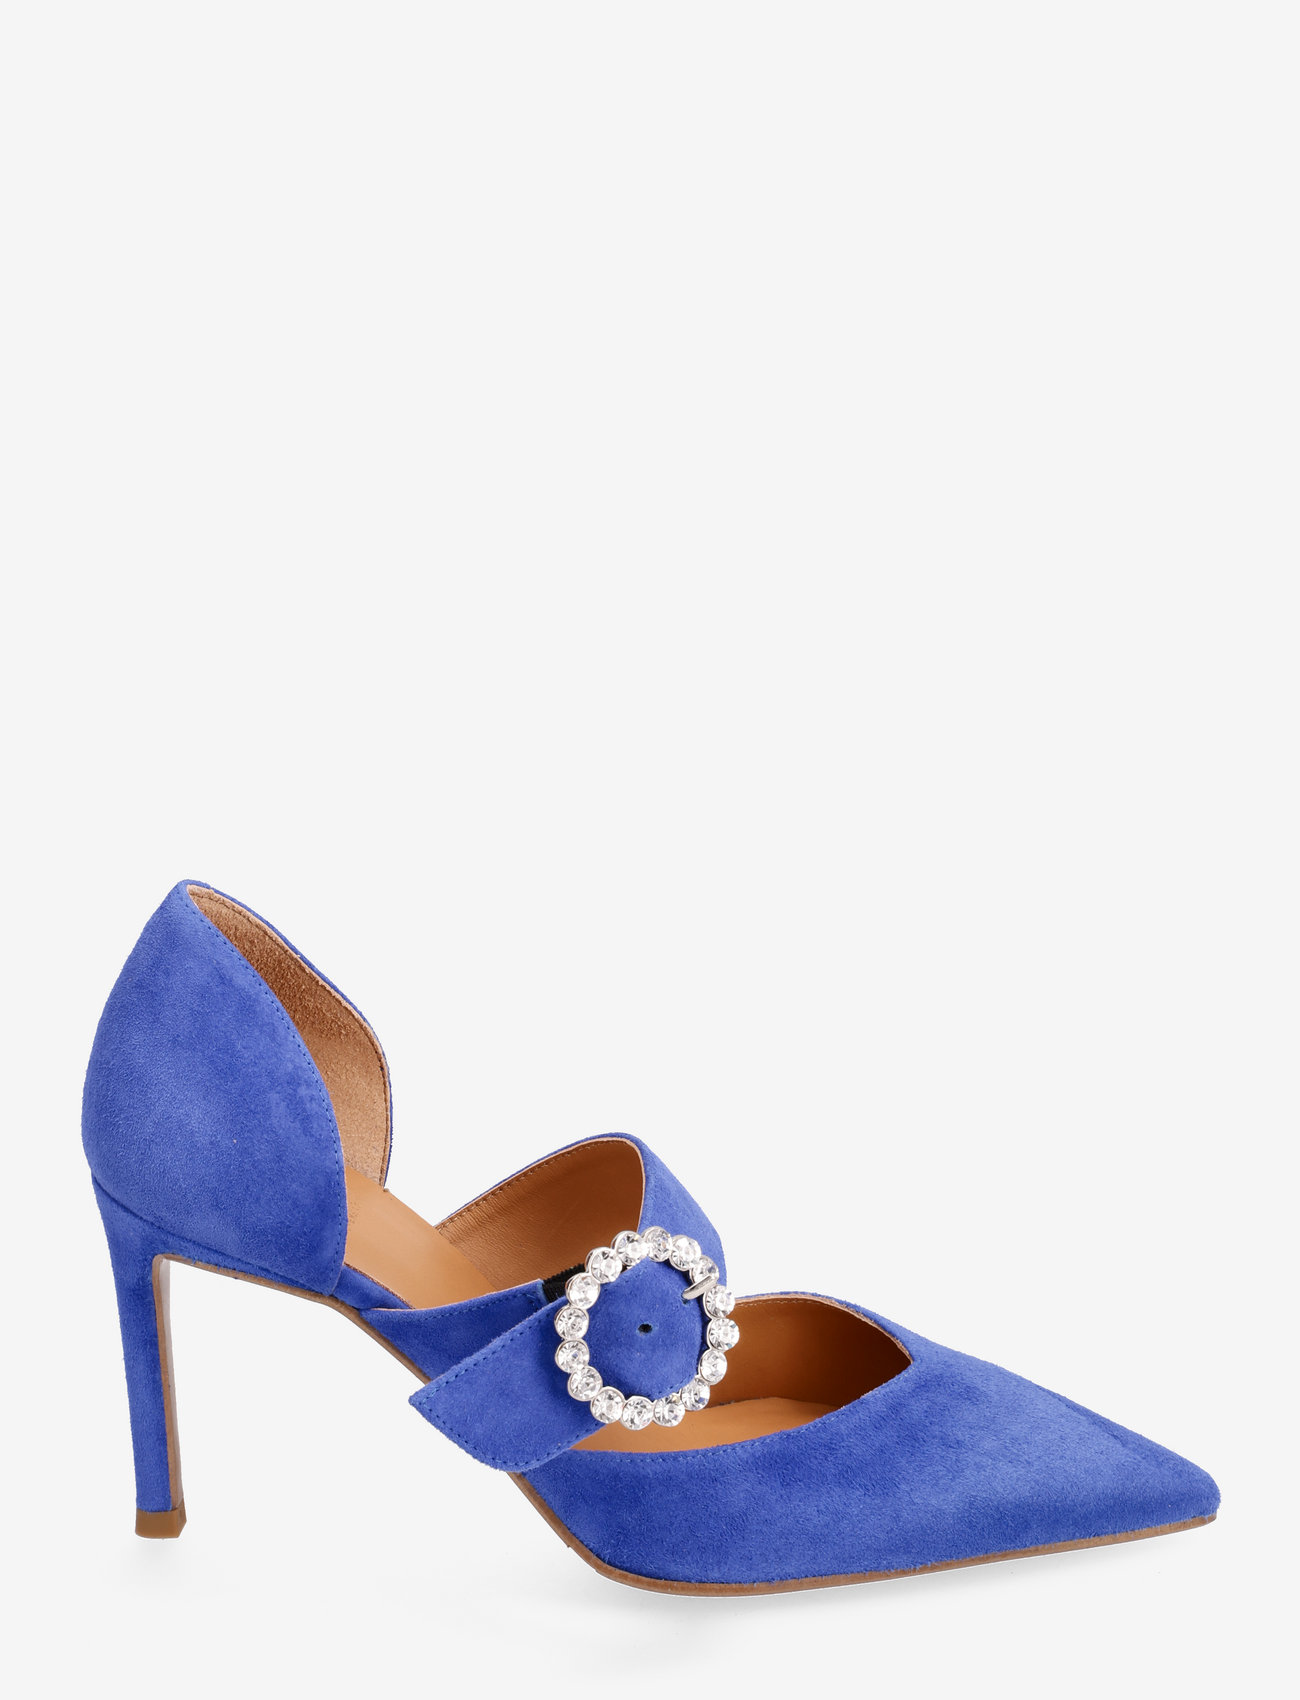 Billi Bi - A4613 - party wear at outlet prices - royal blue suede - 1